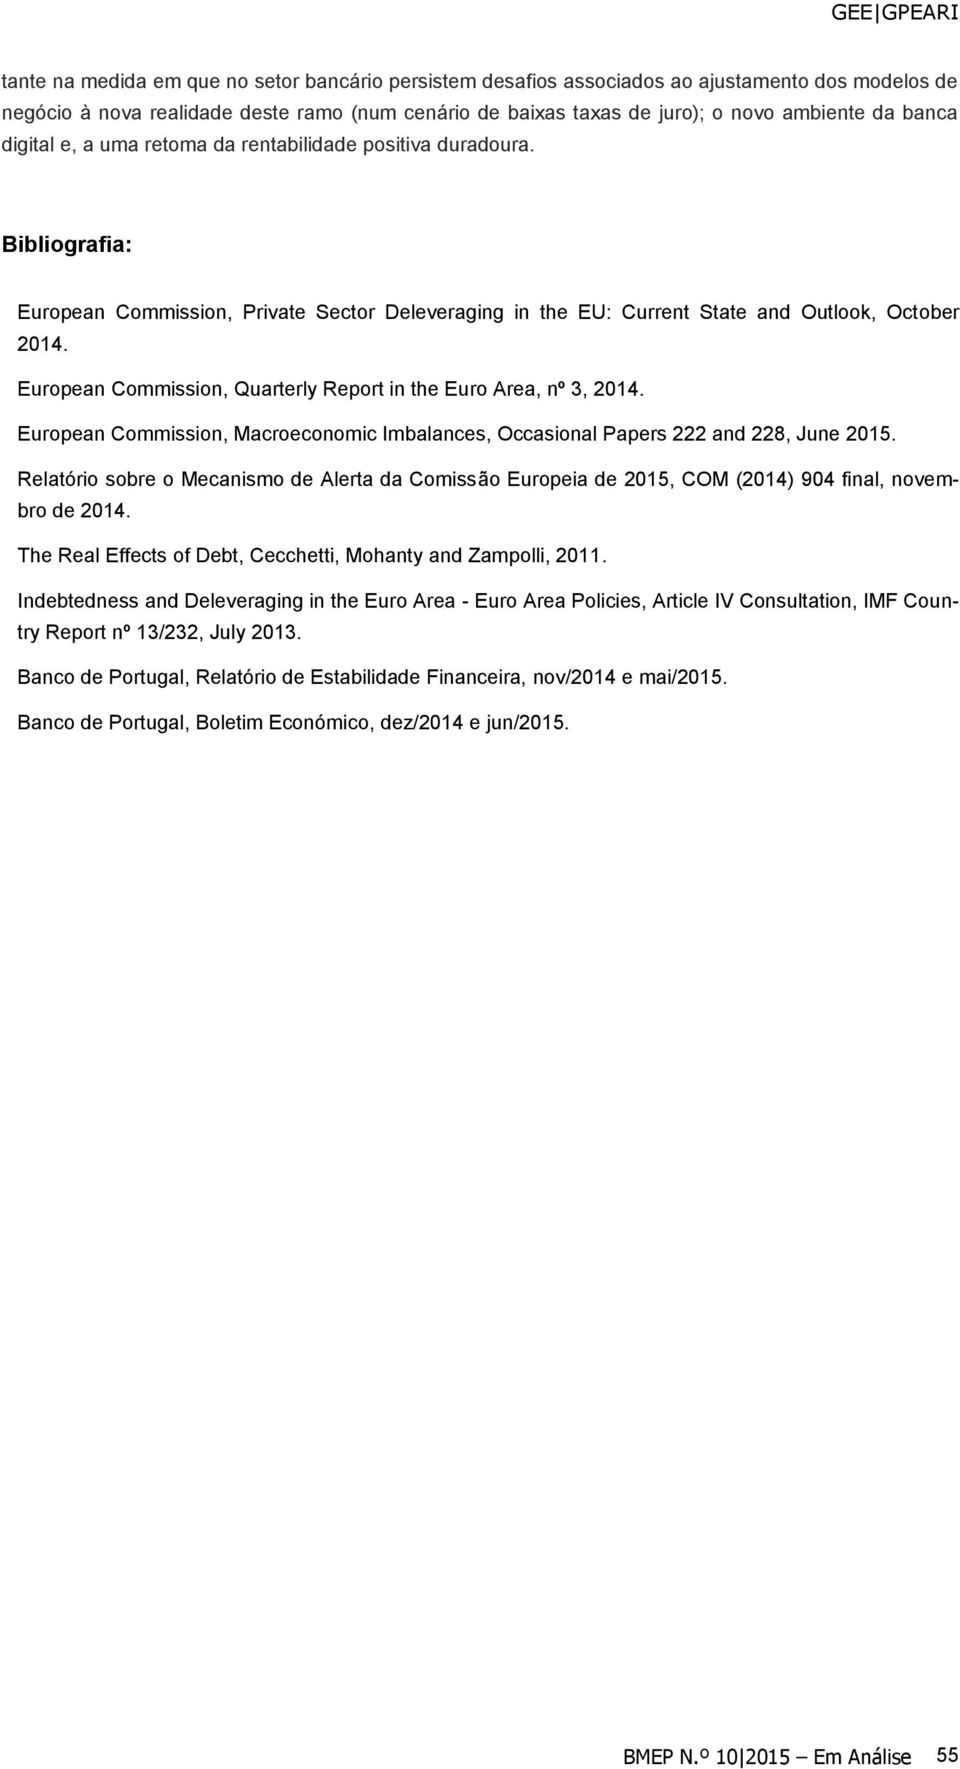 European Commission, Quarterly Report in the Euro Area, nº 3, 2014. European Commission, Macroeconomic Imbalances, Occasional Papers 222 and 228, June 2015.